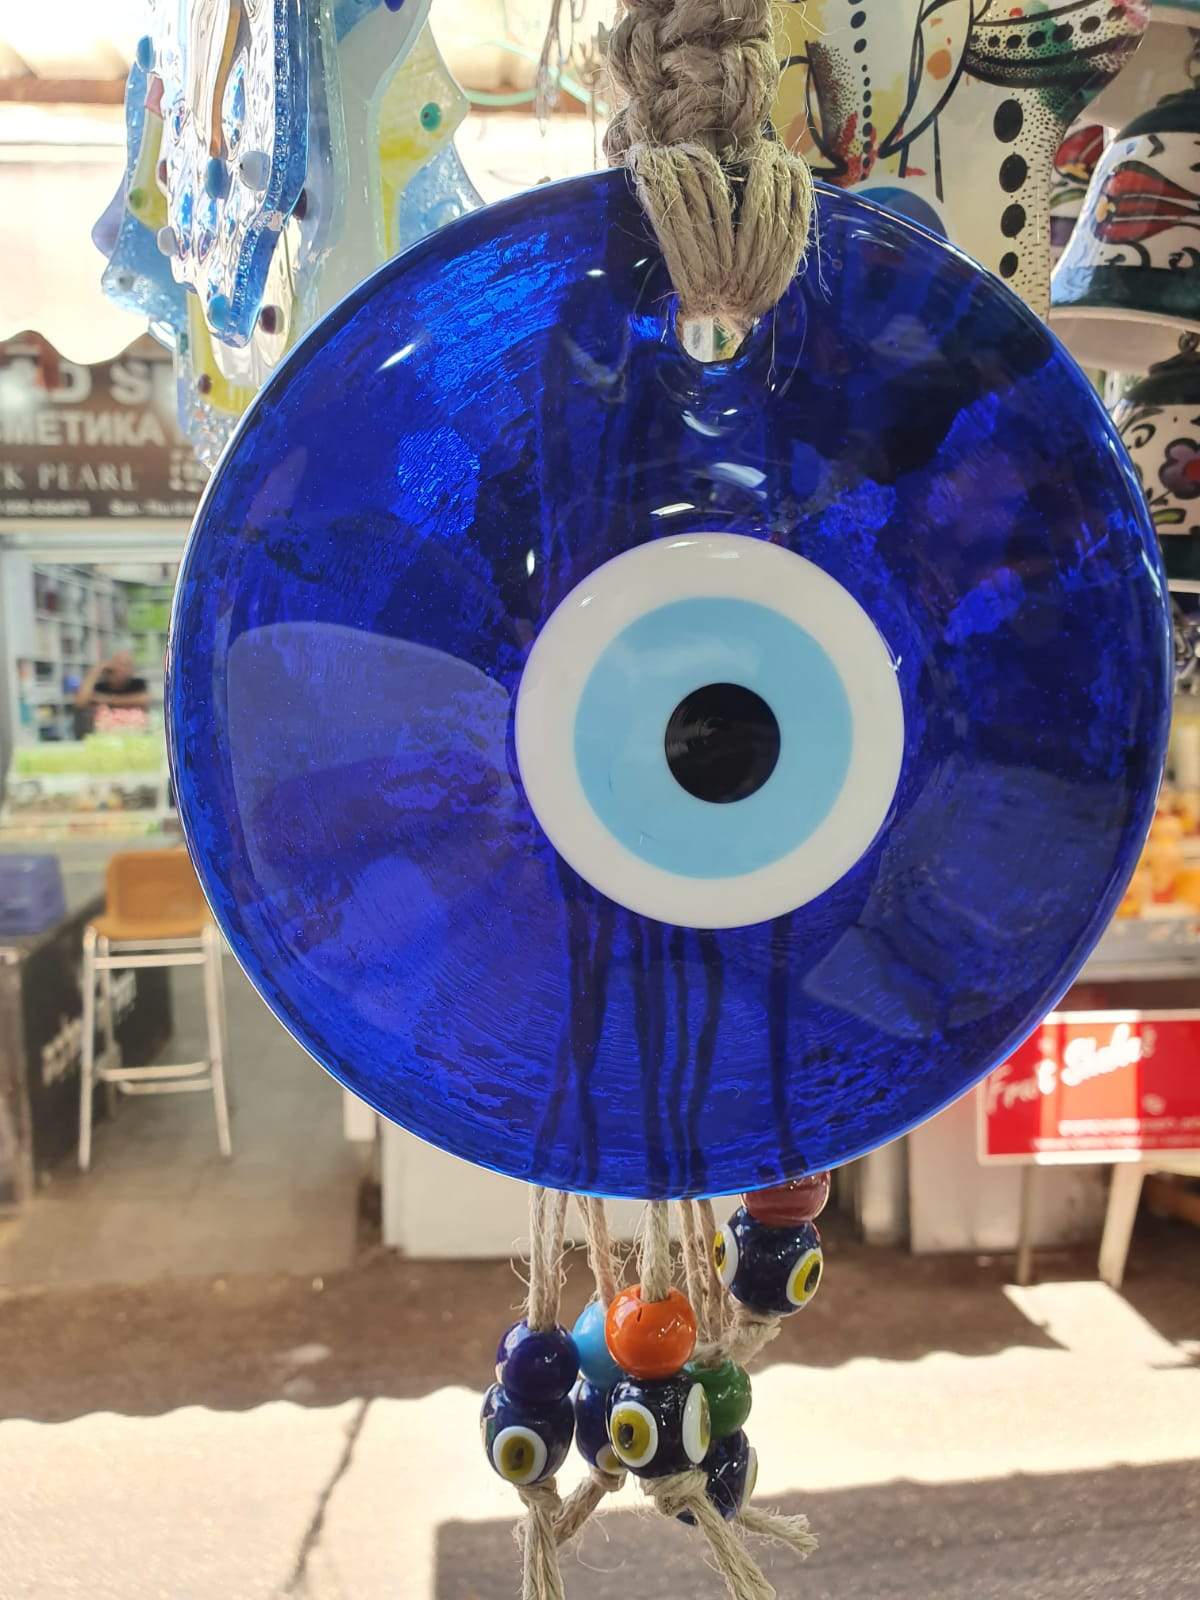 Bluenoemi Jewelry wall hangings Blue Glass Evil Eye Souvenir Luck and Blue Eyes Symbols and beads on a rope.